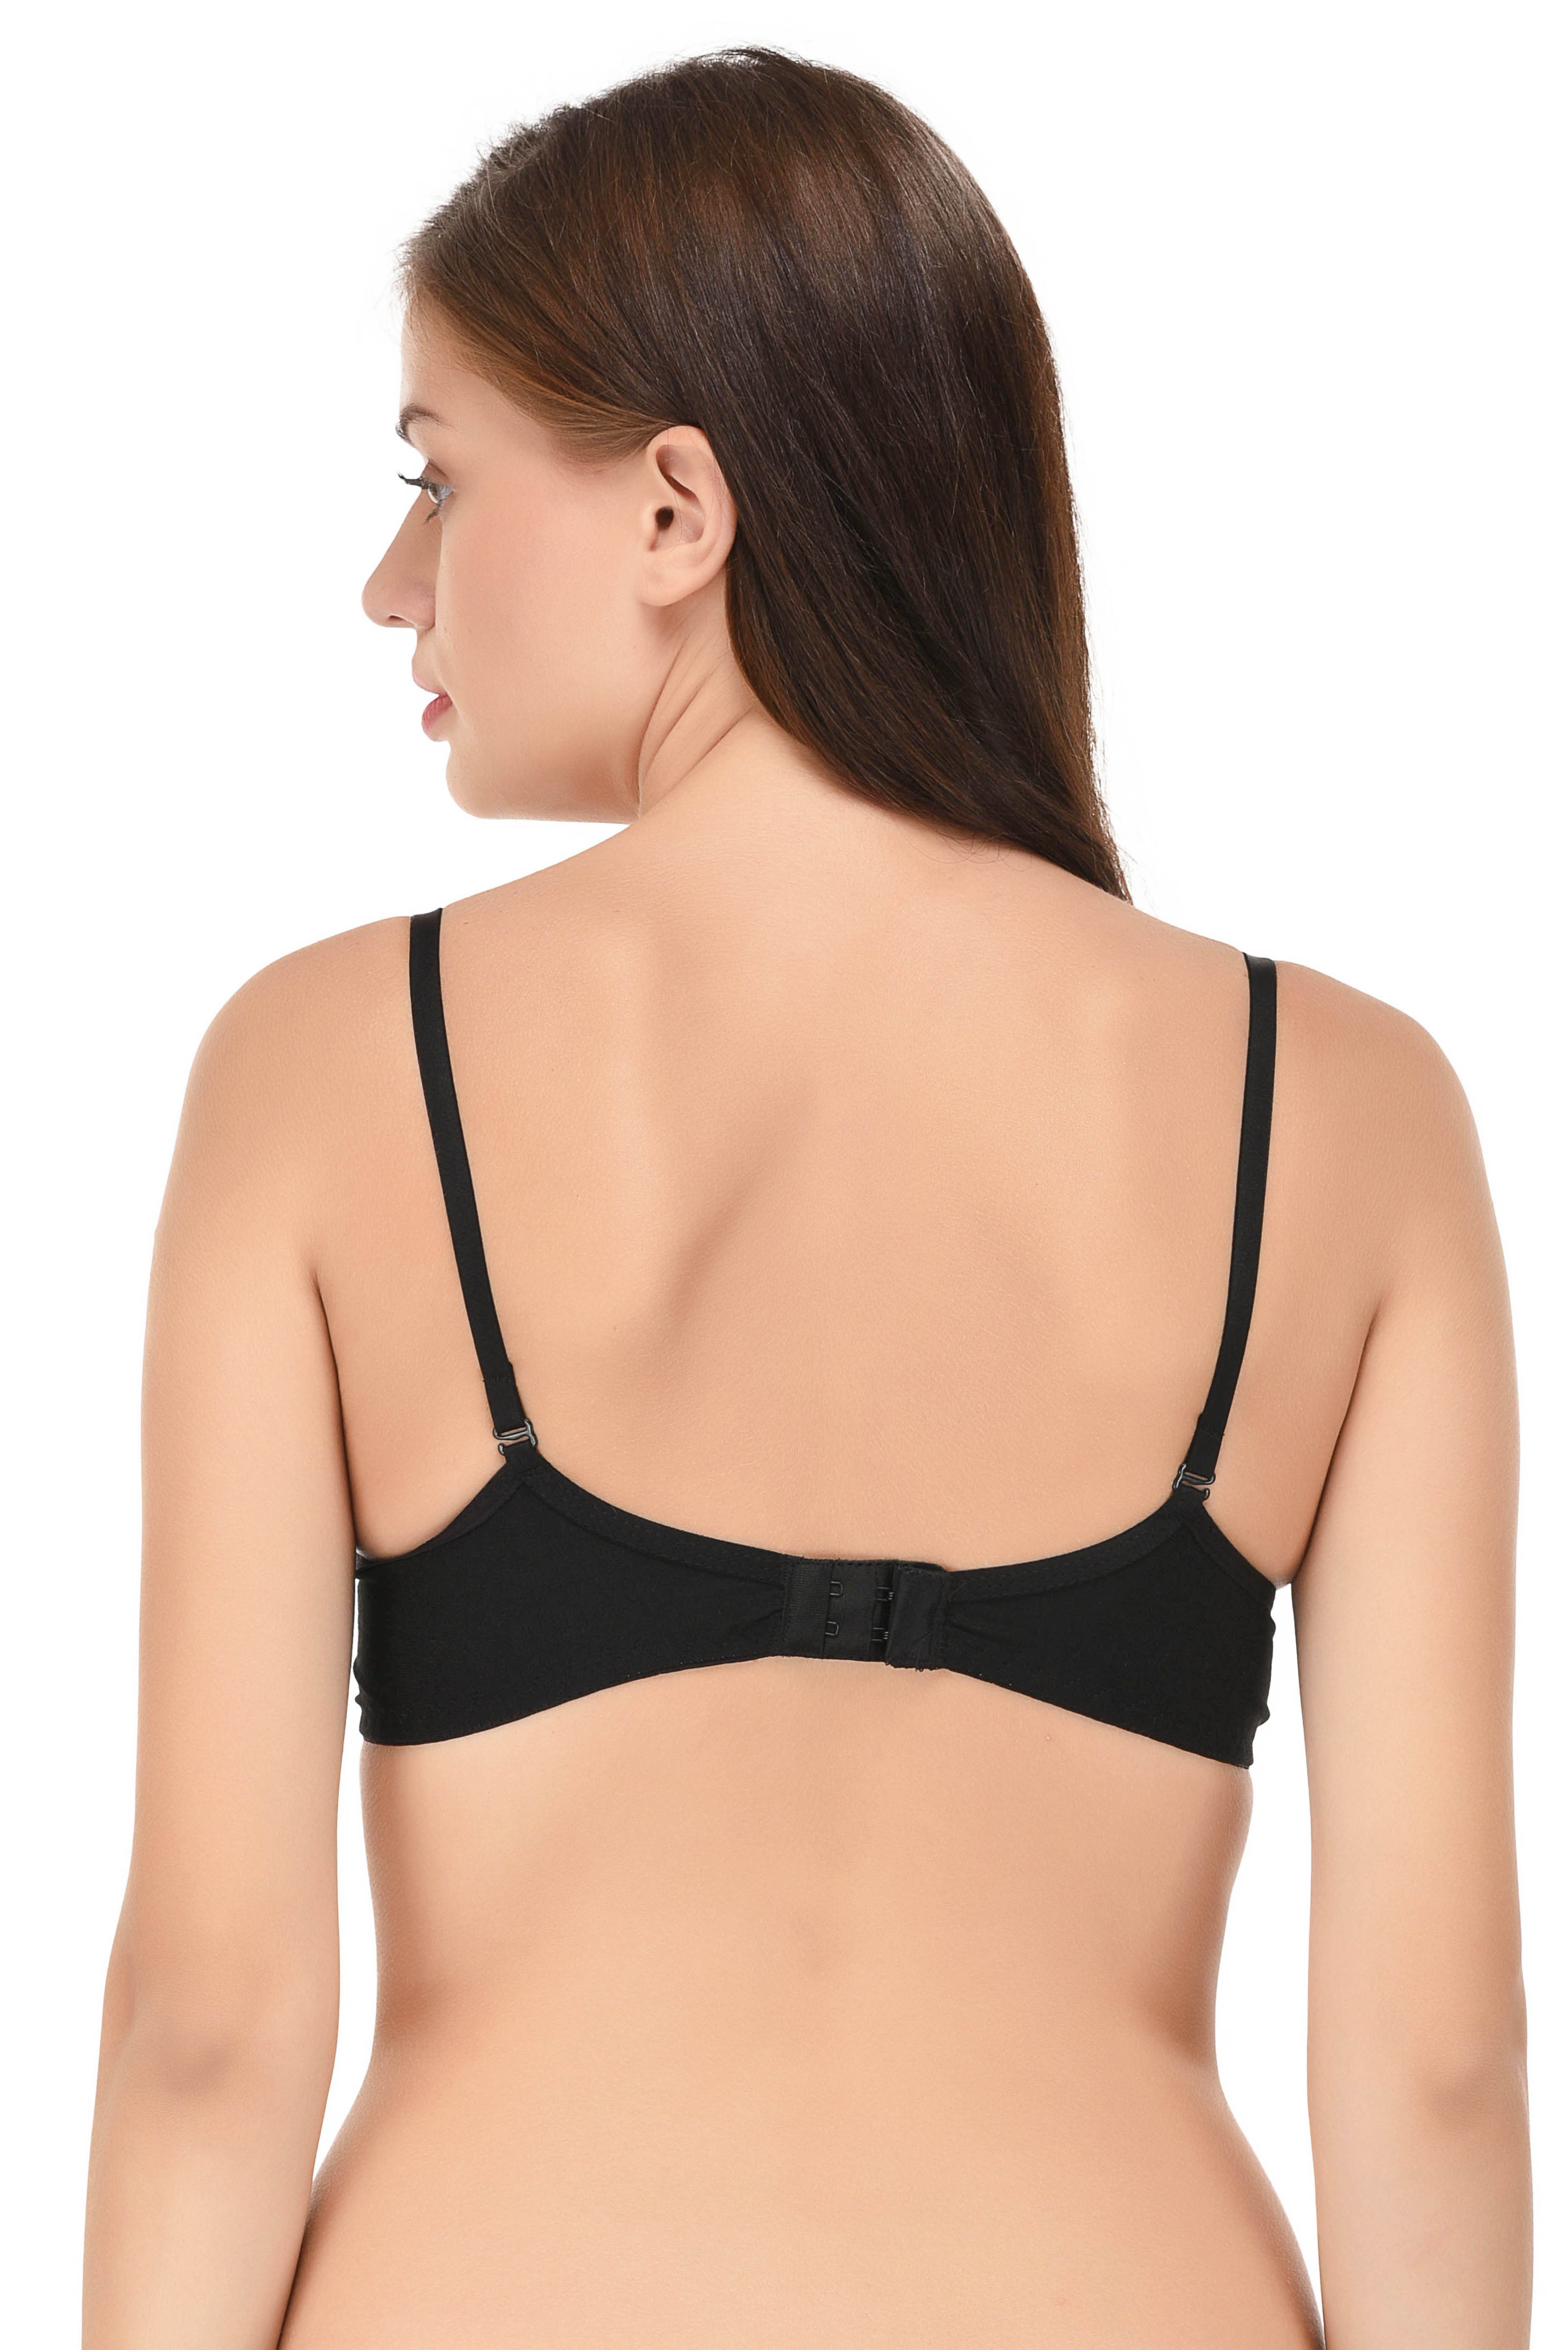 Buy Lizaray Cotton Push Up Bra Black Online At Best Prices In India Snapdeal